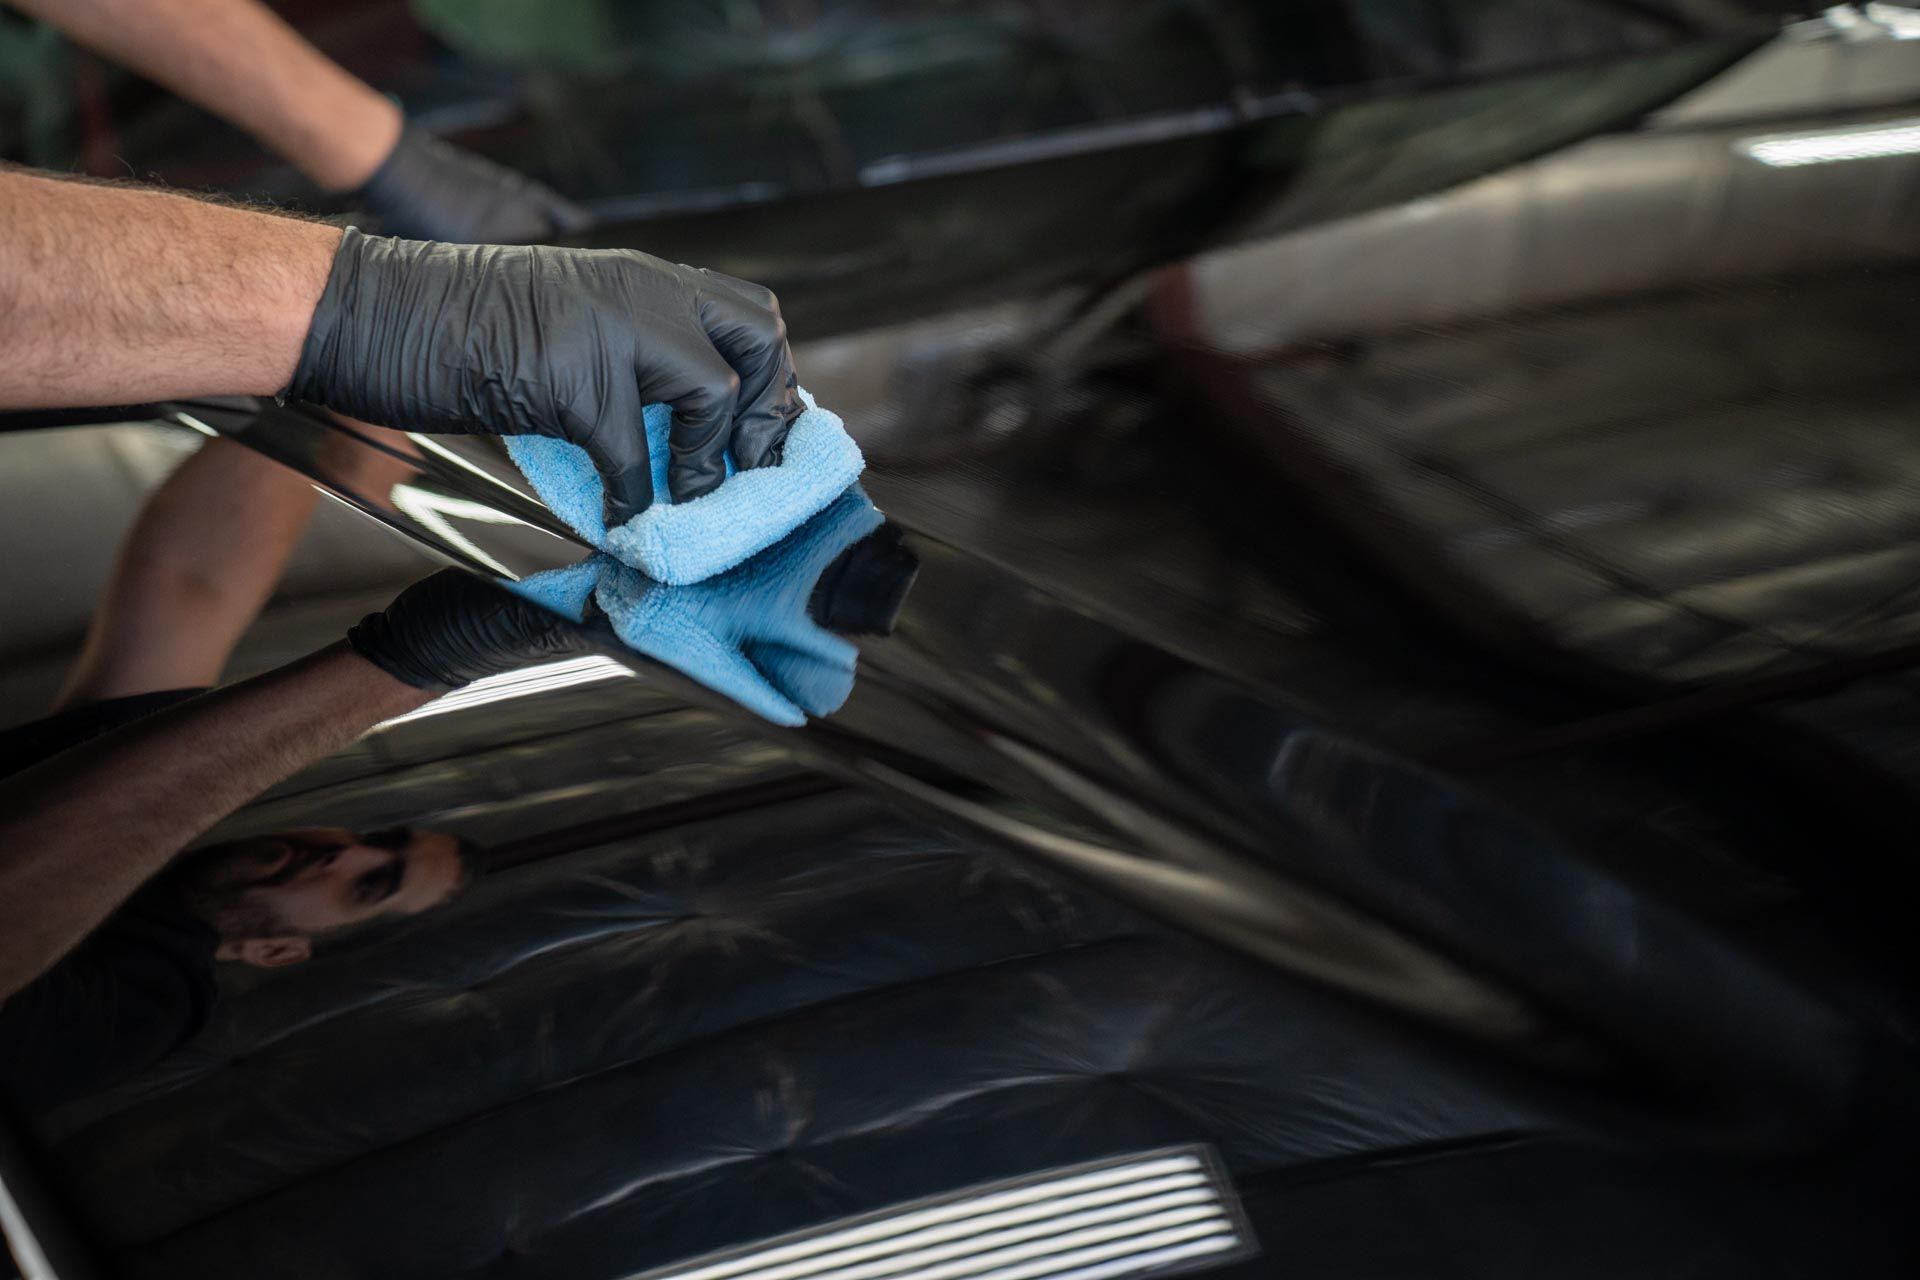 Ceramic Coating - A person is cleaning the windshield of a car with a cloth .